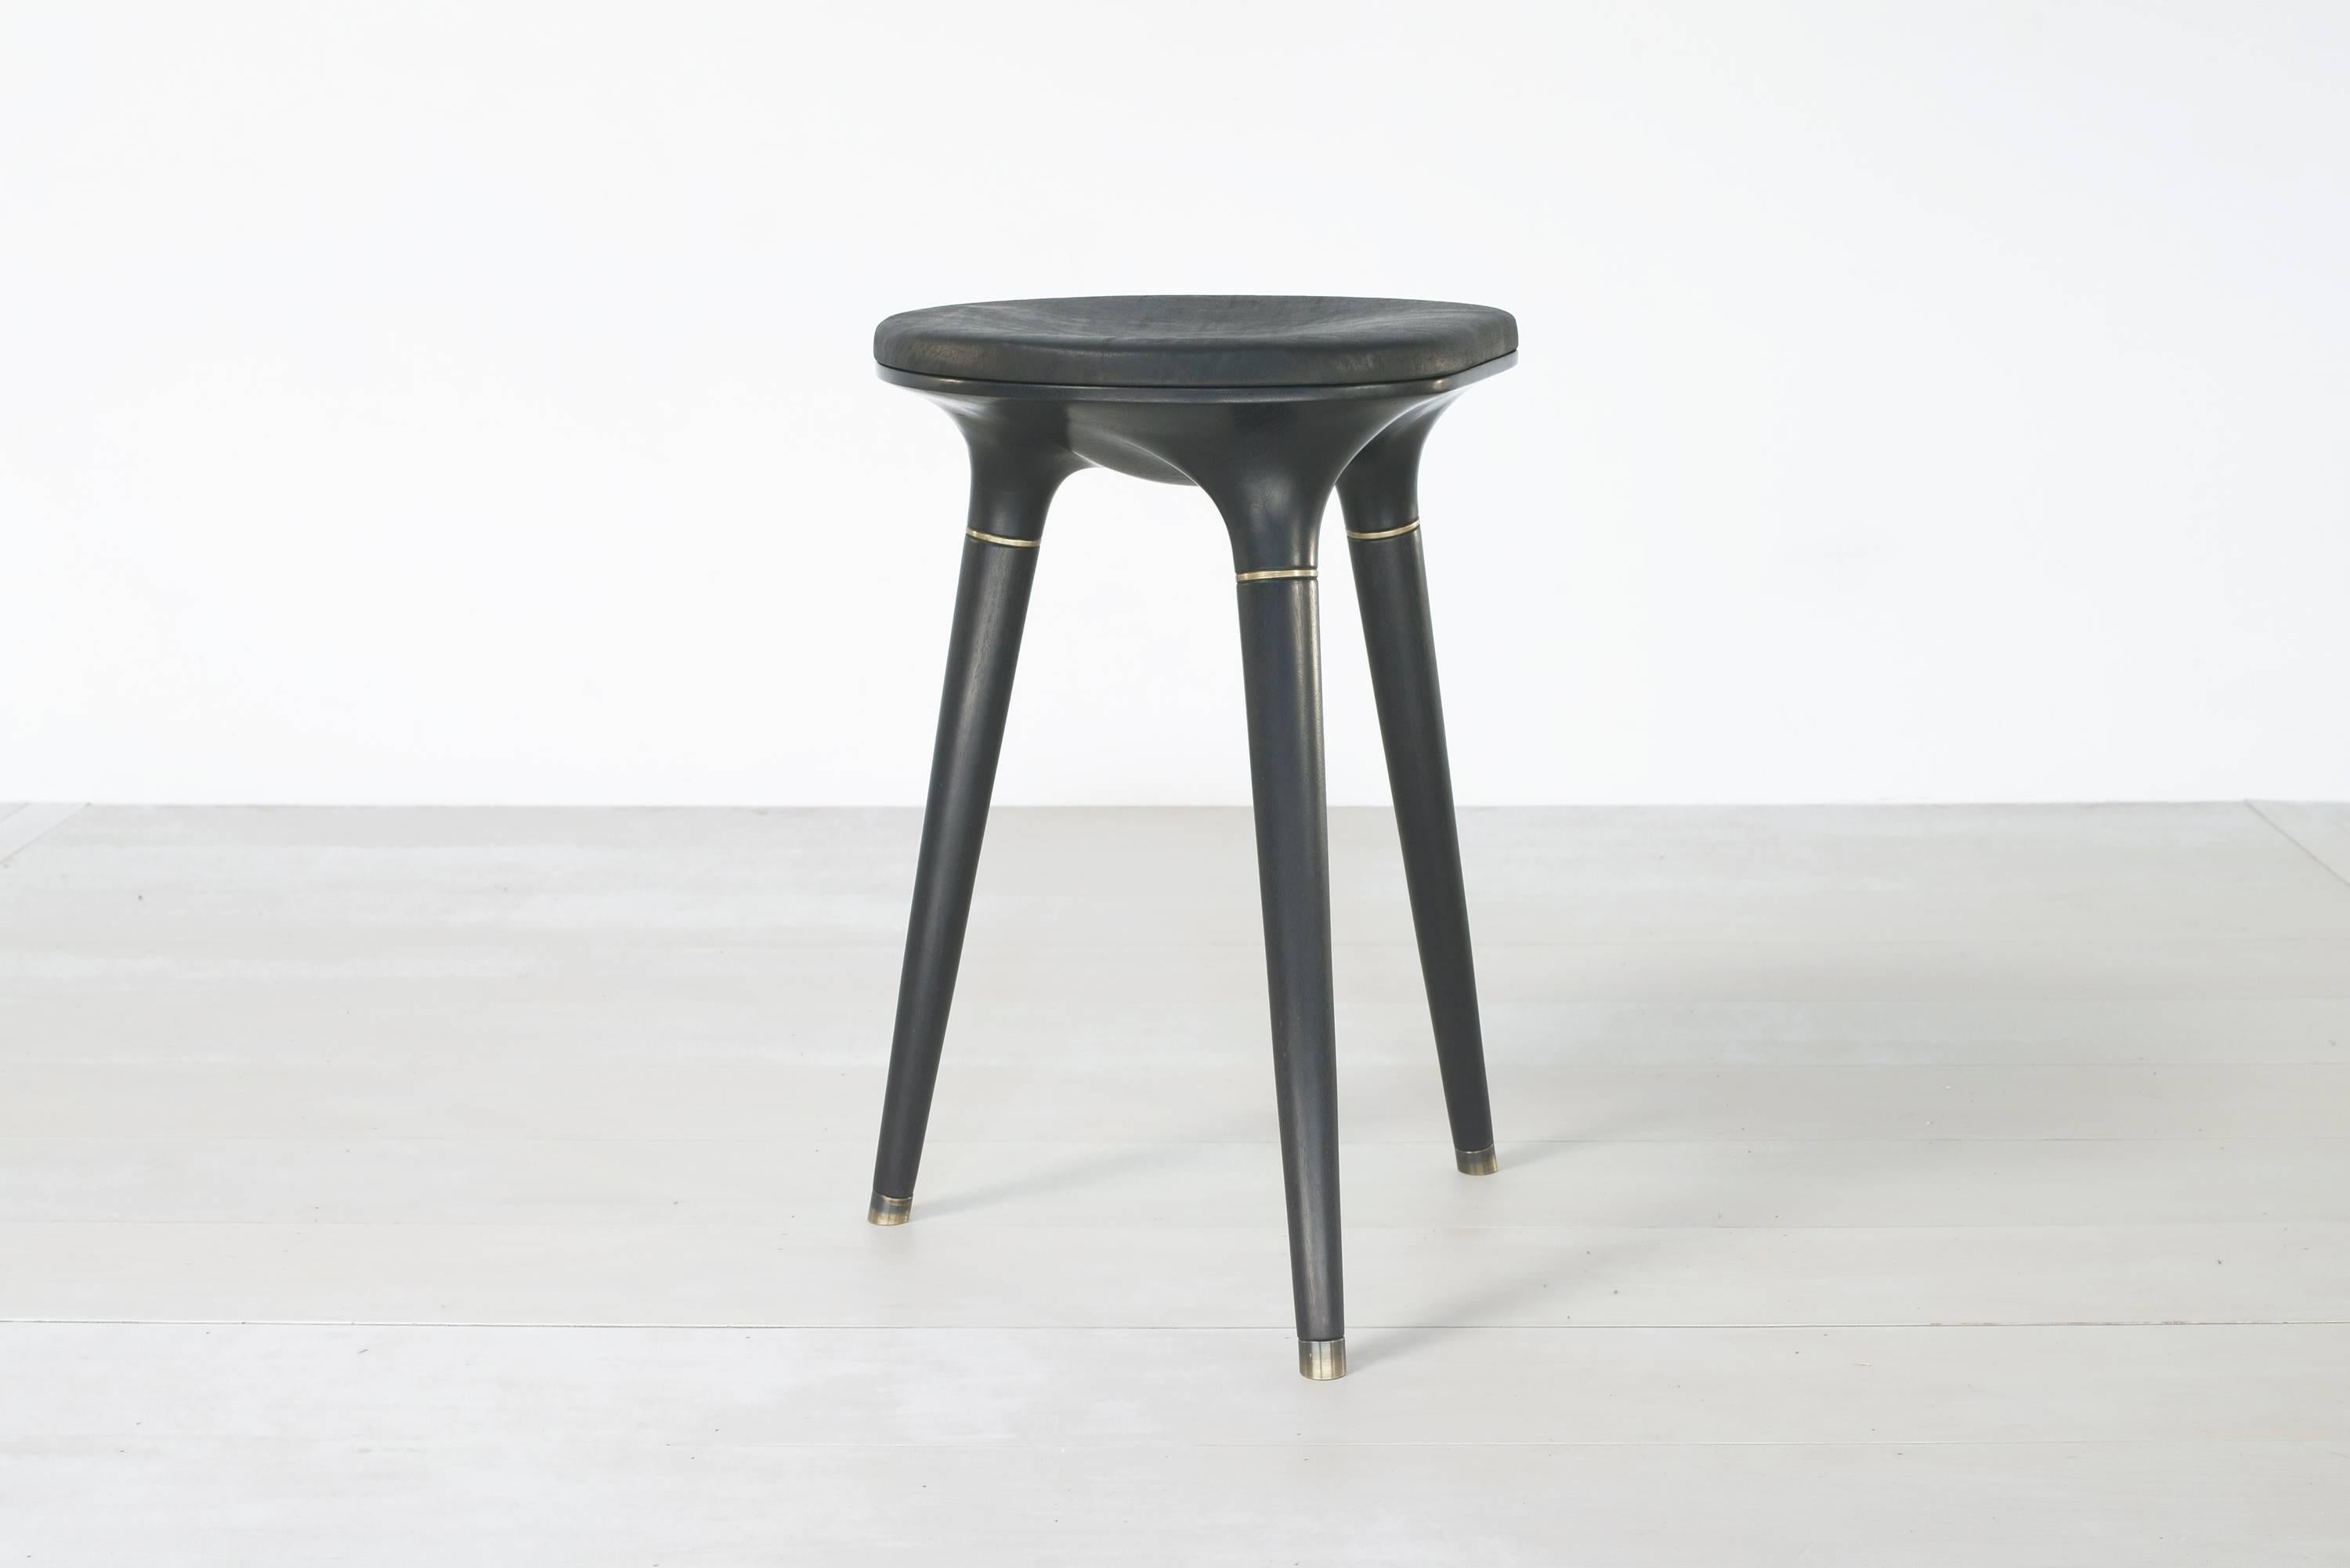 Ebonized stool 001 from Series 001 by Vincent Pocsik.

Carved walnut stool with leather cushion top and brass accents. Shown here in a ebonized finish at counter height. 

Brass feet to have custom felt insets. 

Vincent Pocsik finds the balance